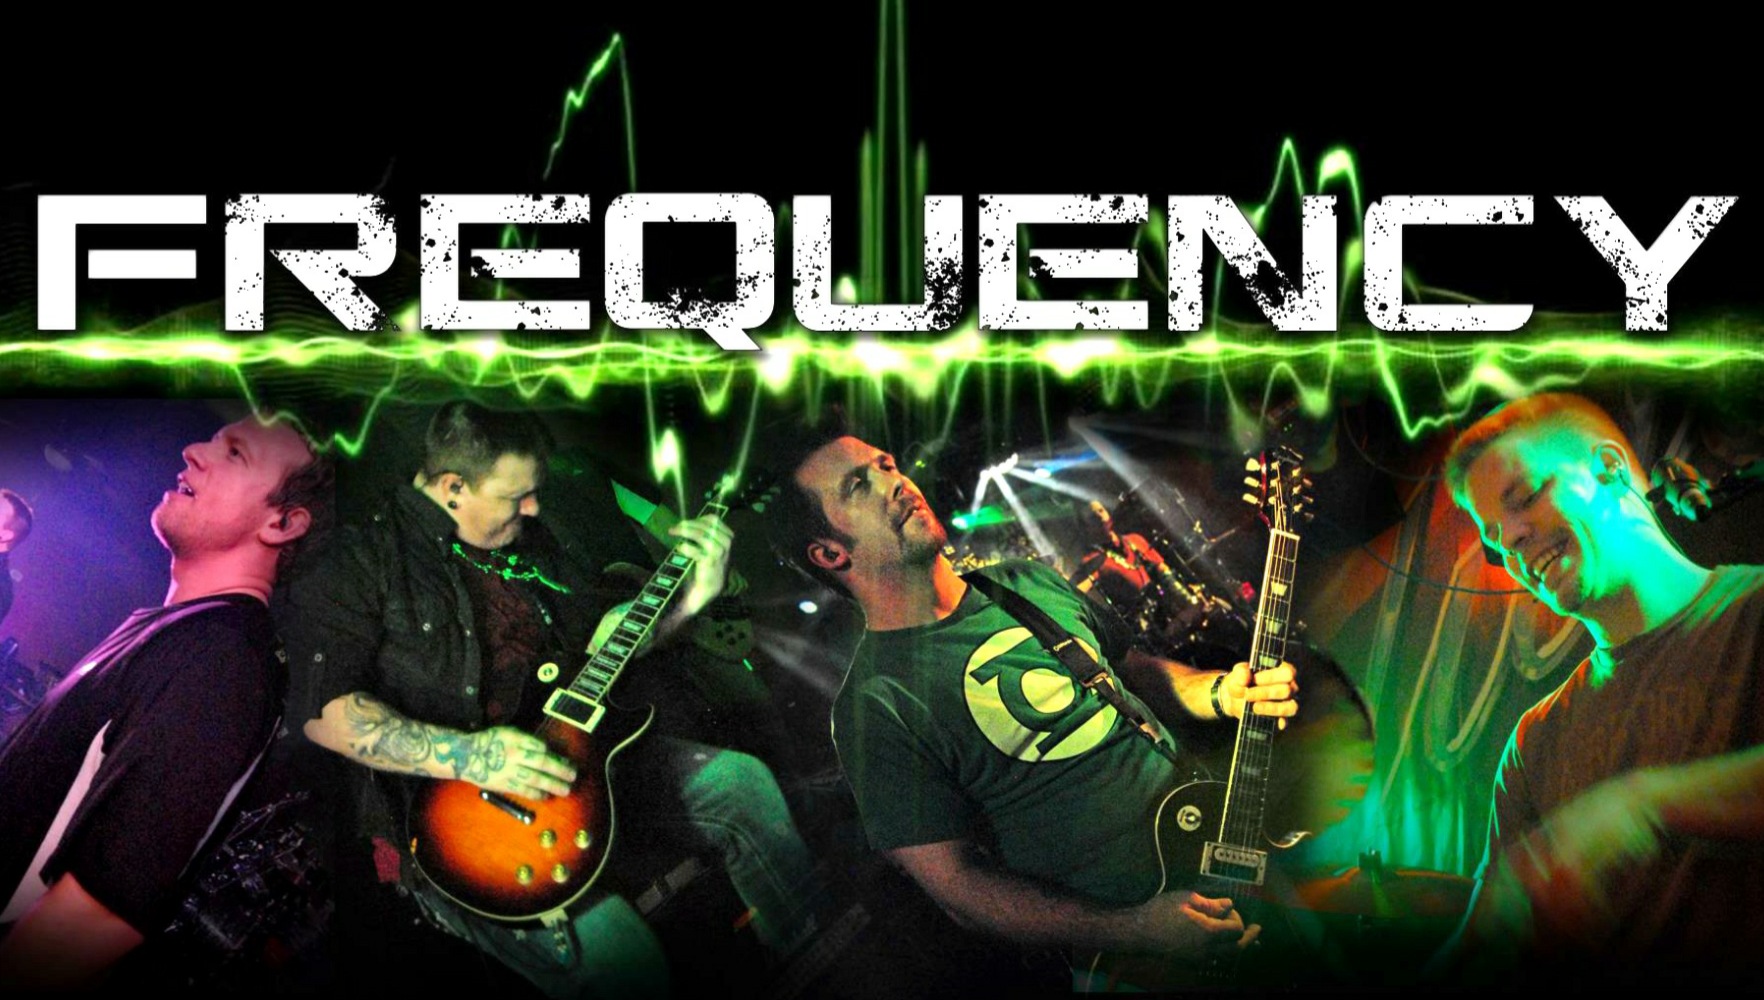 Live Music at The Depot in Norfolk, NE - 
						Nebraska Band Frequency     
						performing live at the 
						New Year's Eve Party at 
						The Depot in Norfolk, Nebraska 
						on Thursday, December 31, 2015.
						The Depot is located at 
						211 W Northwestern Avenue, 
						Norfolk, NE 68701, 
						Phone (402) 844-3241.